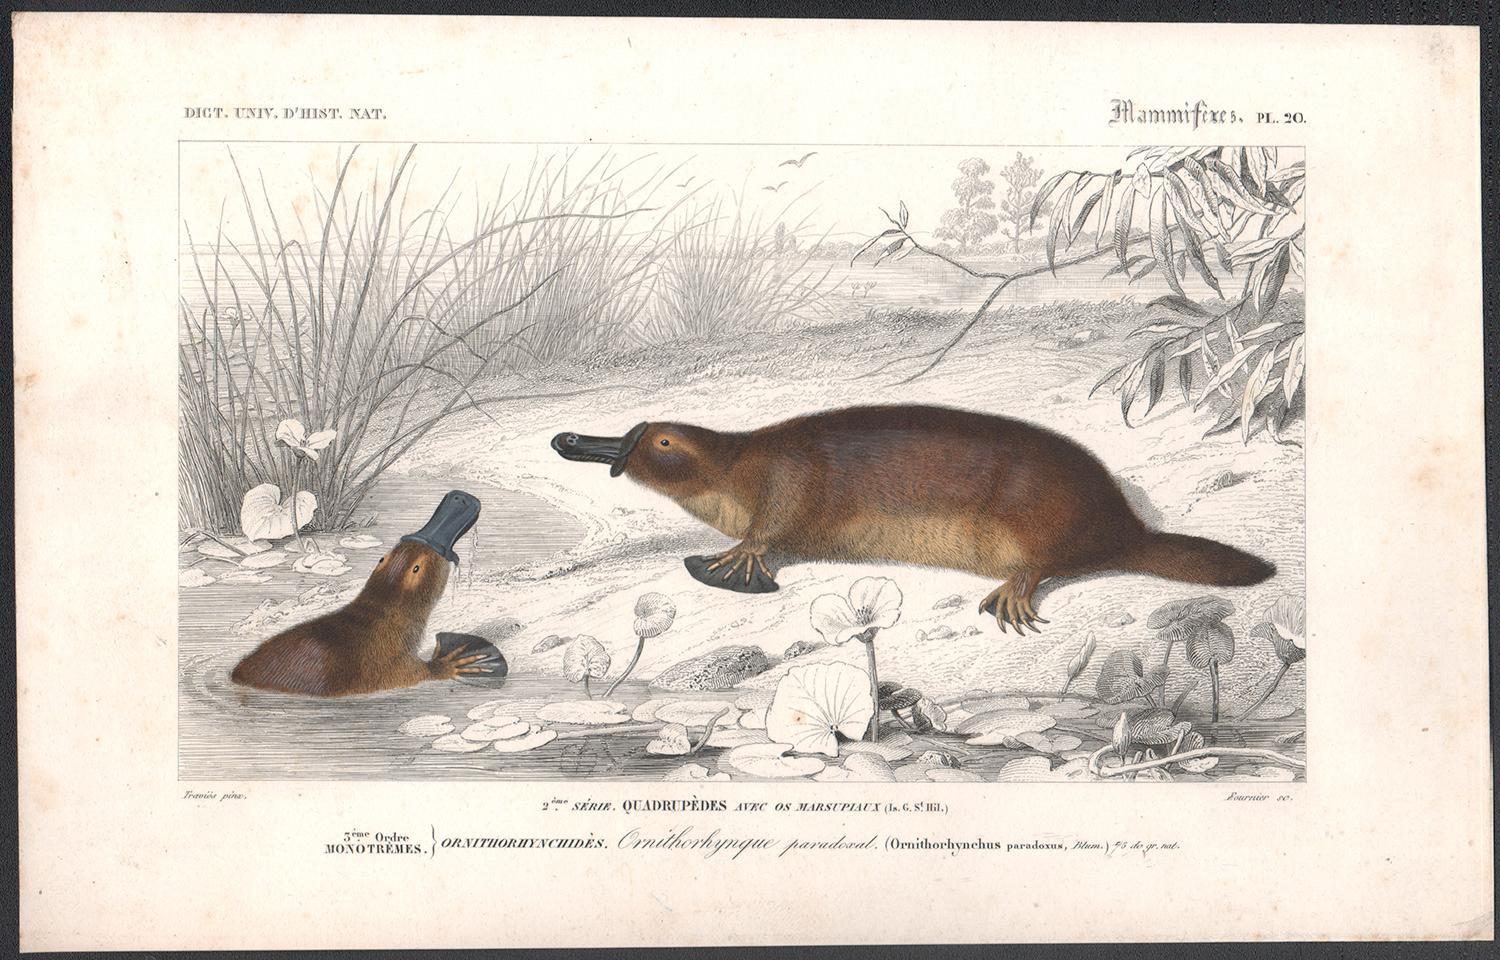 Ornithorhynque paradoxal (Platypus), French antique animal engraving - Print by Édouard Traviès 